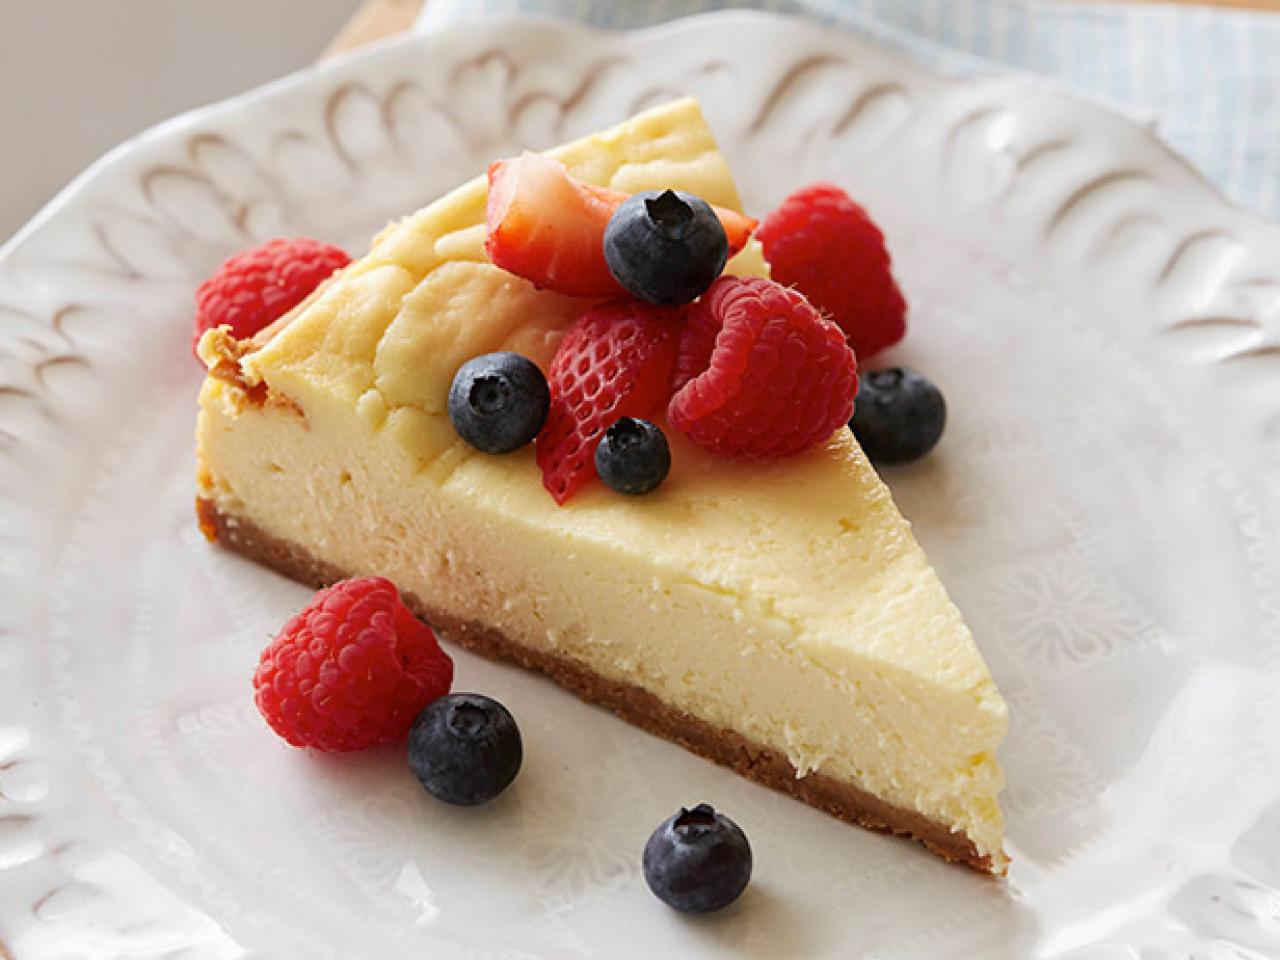 9 Inch Classic Cheesecake Recipe - Homemade In The Kitchen